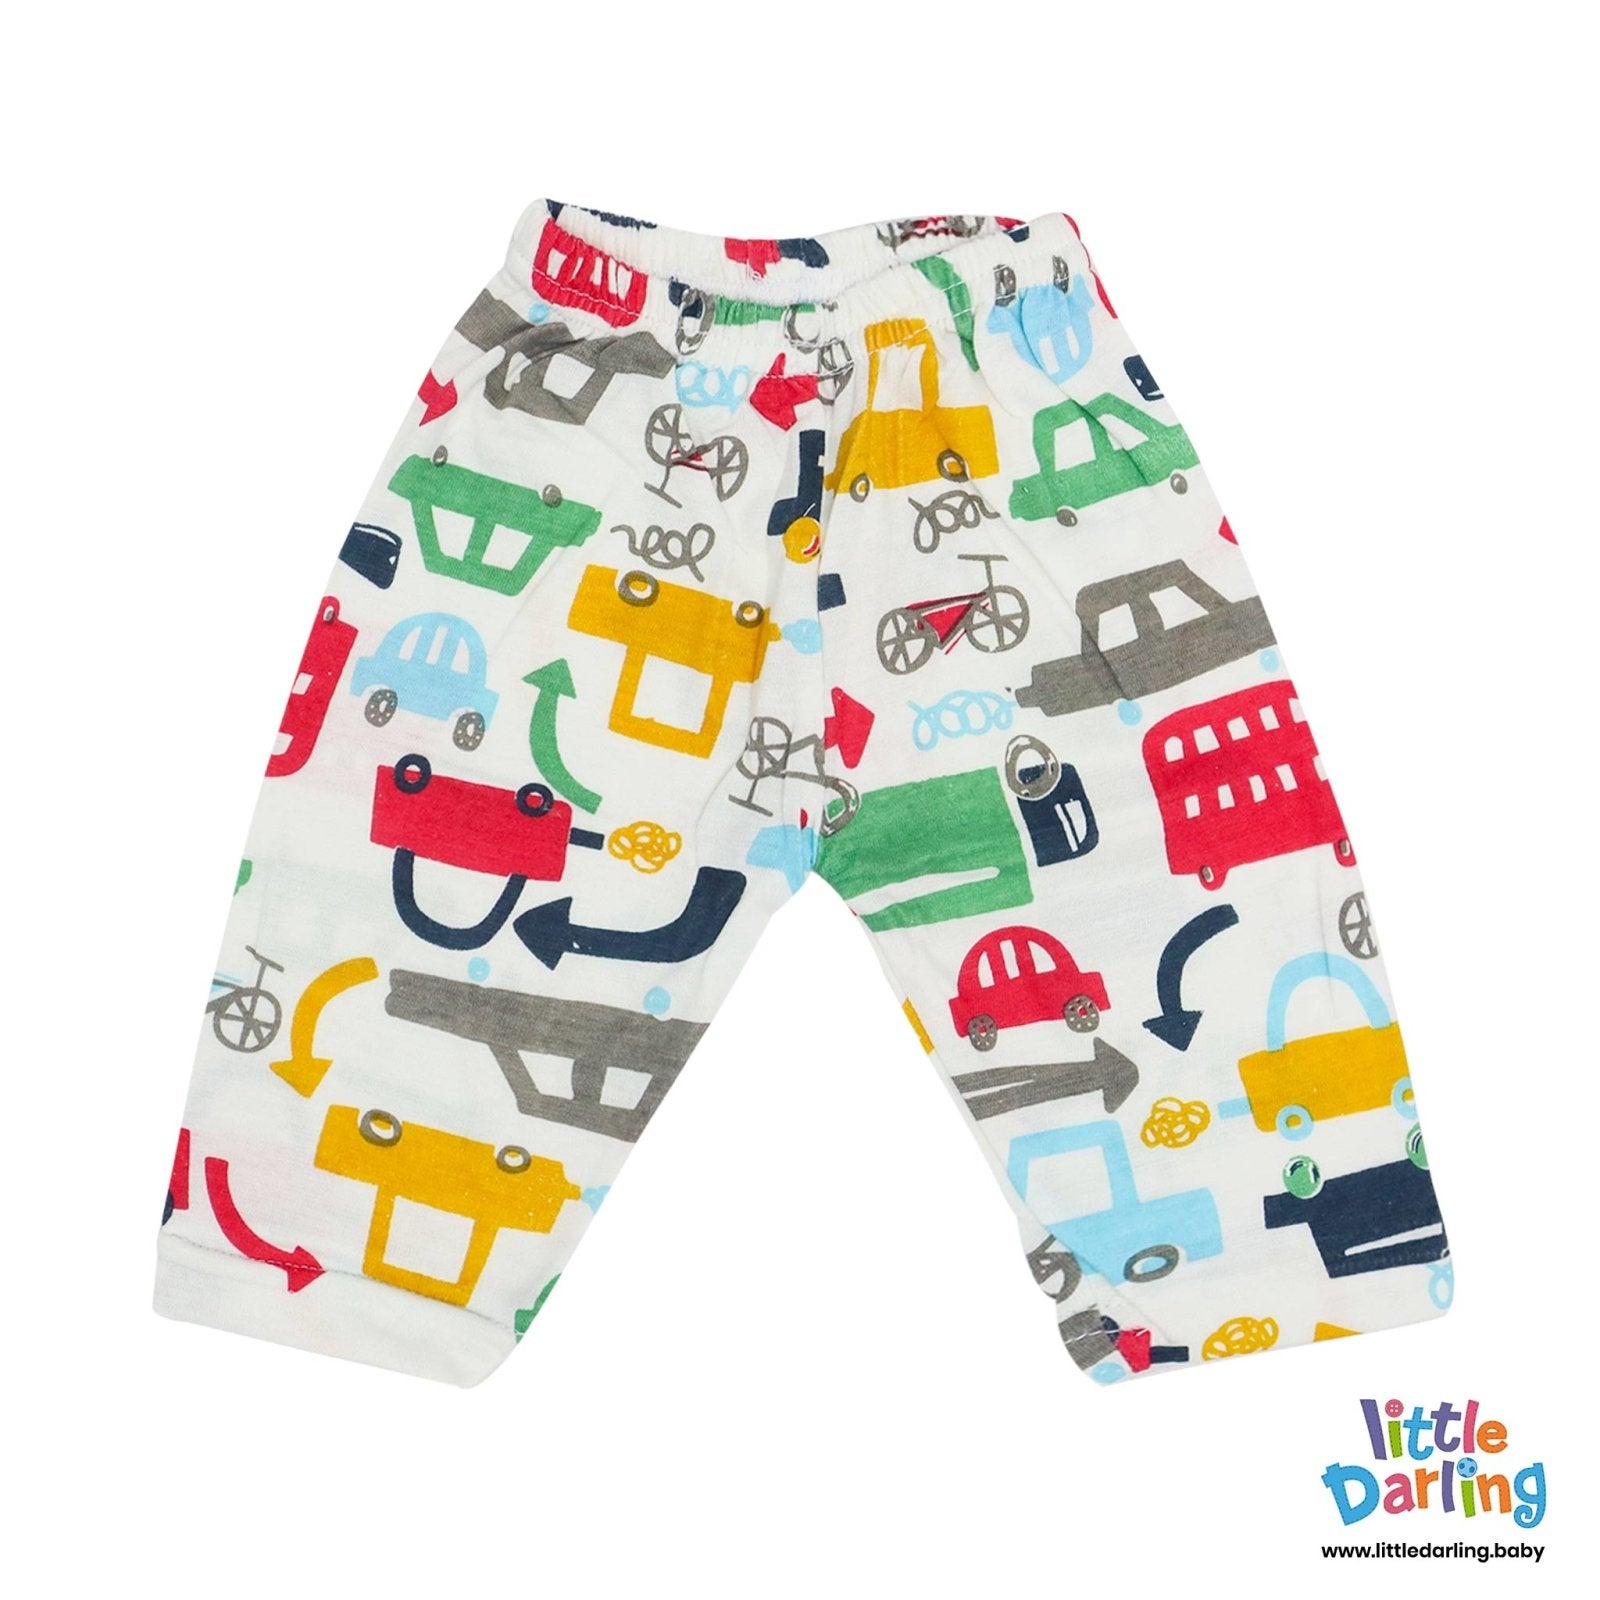 Baby Pajamas pk of 2 Cars Print by Little Darling